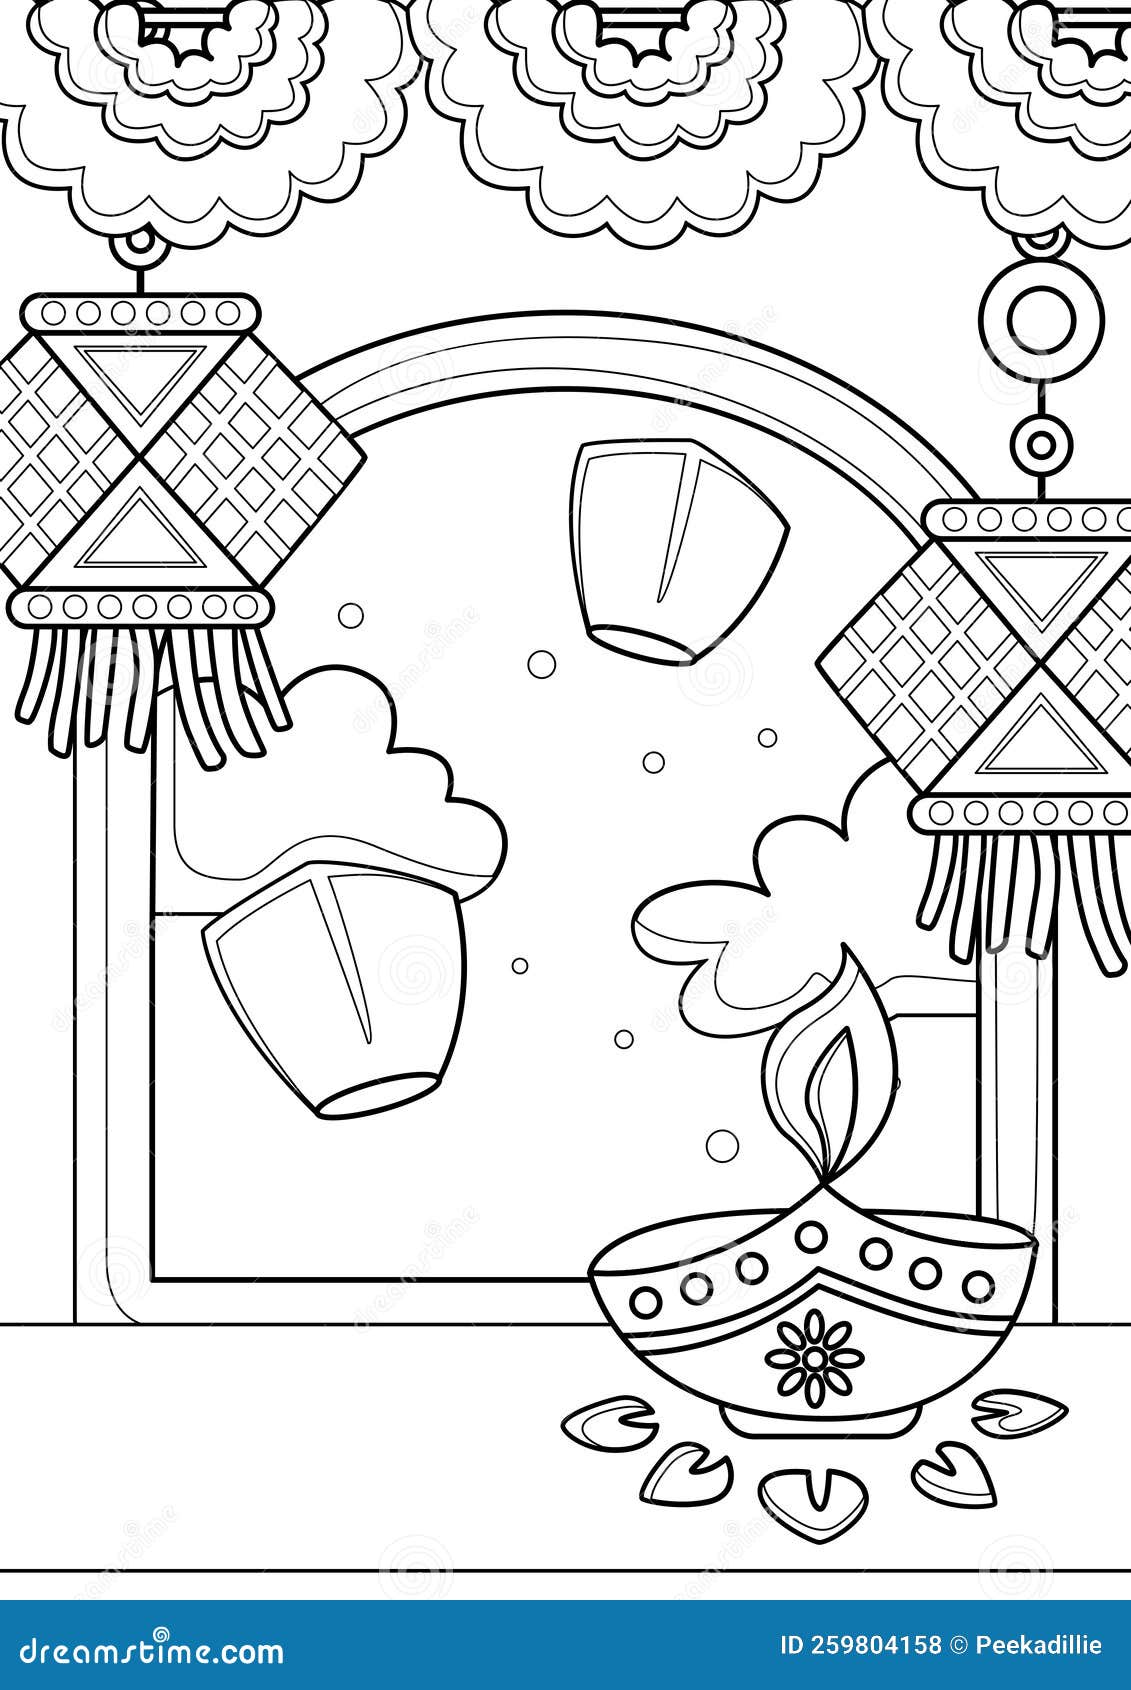 Update more than 154 easy diwali drawing for kids